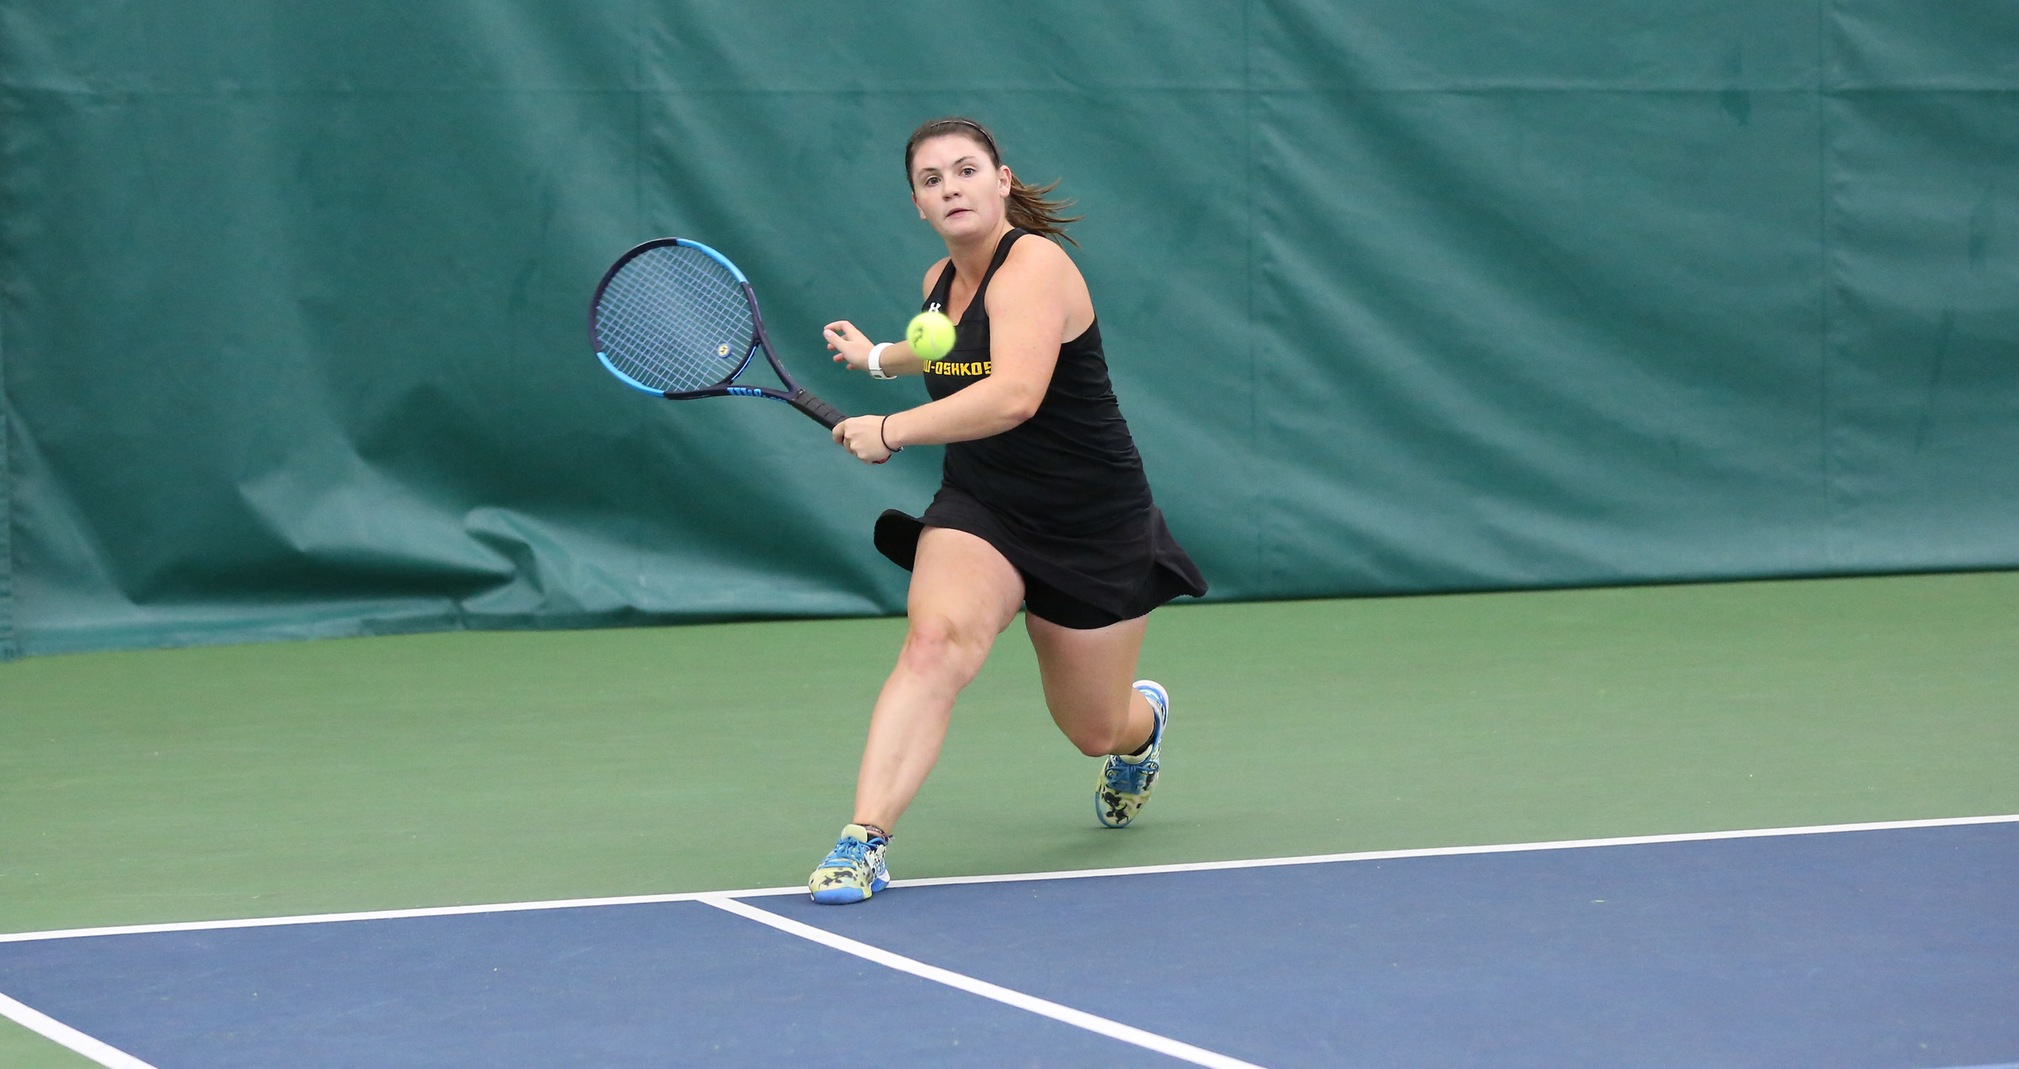 Samantha Koppa finished second at No. 2 singles and teamed with Kelley Hodyl for a second-place finish at No. 1 doubles during the WIAC Championship.